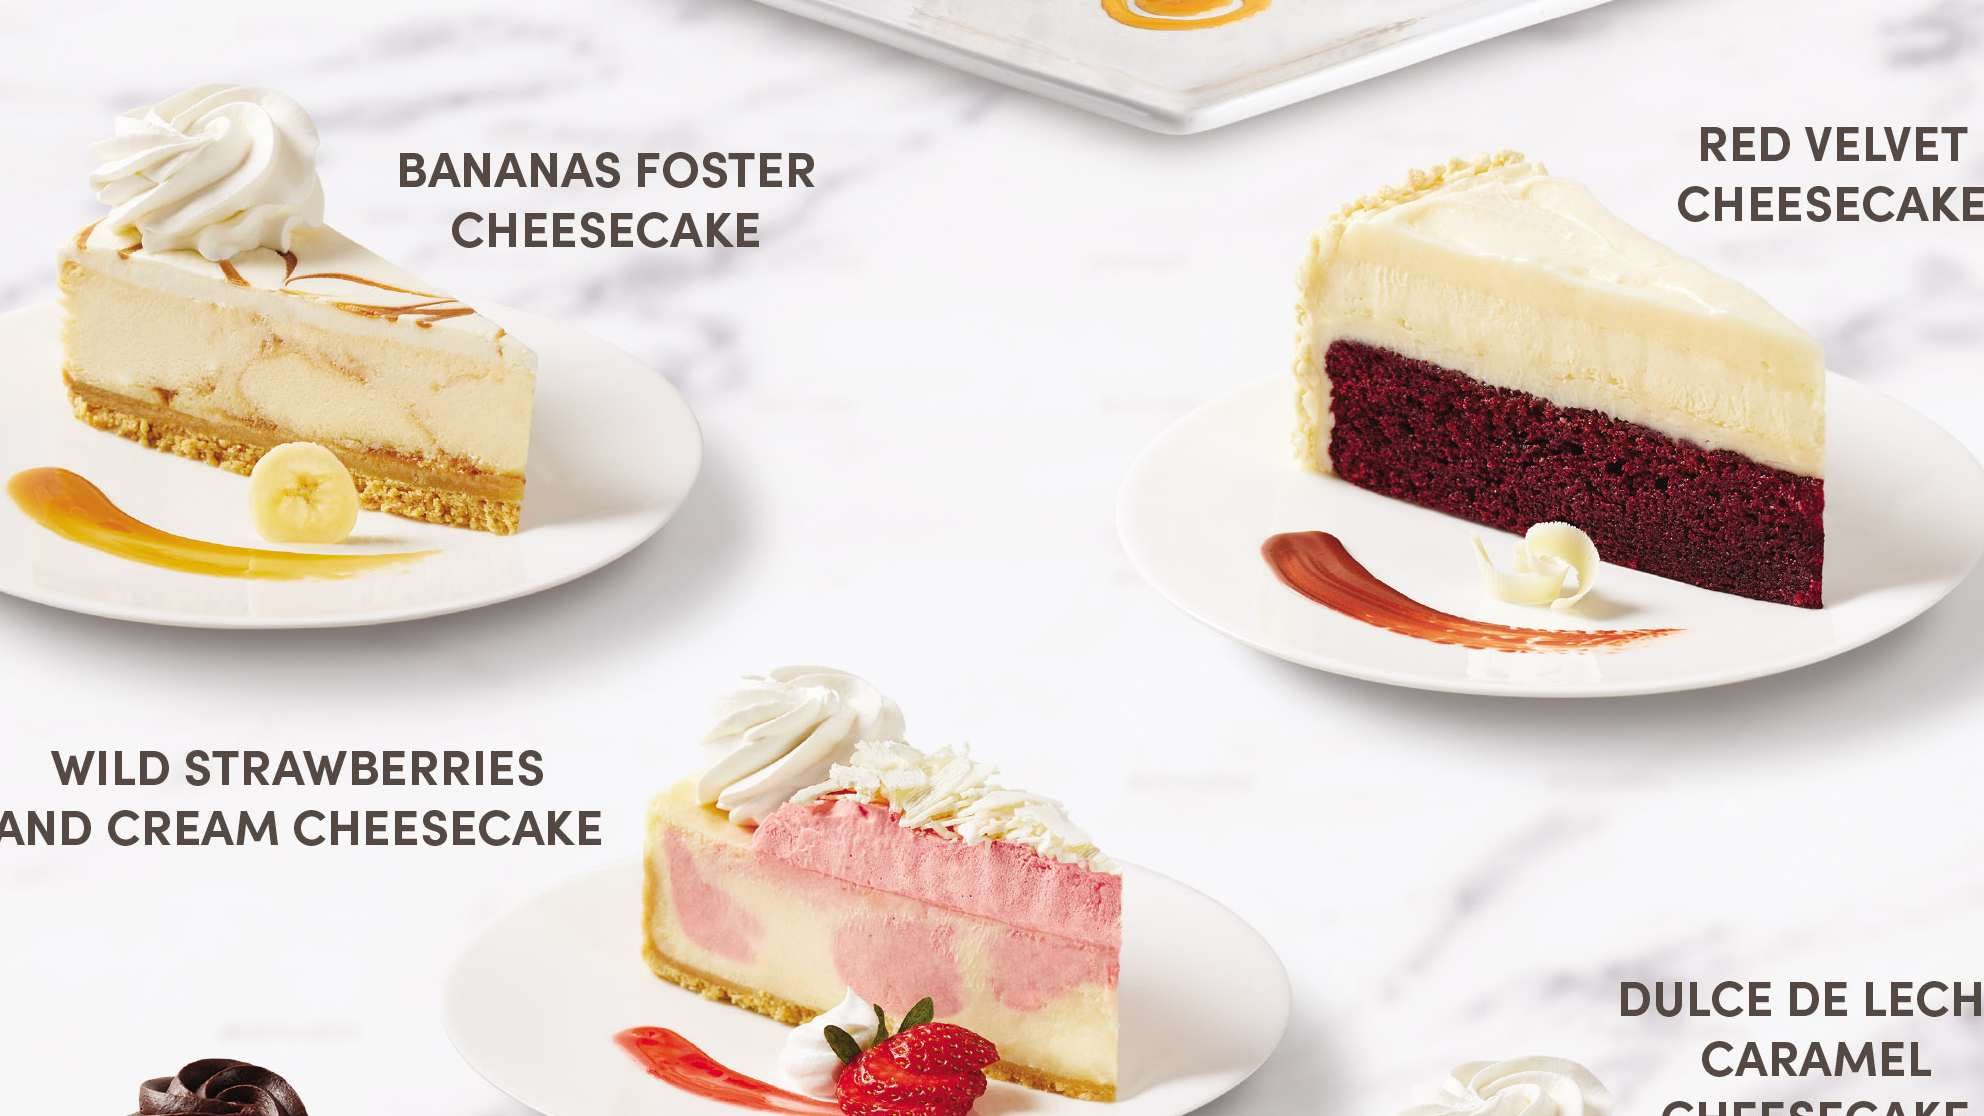 LOOK: Tim Hortons sells The Cheesecake Factory cakes now